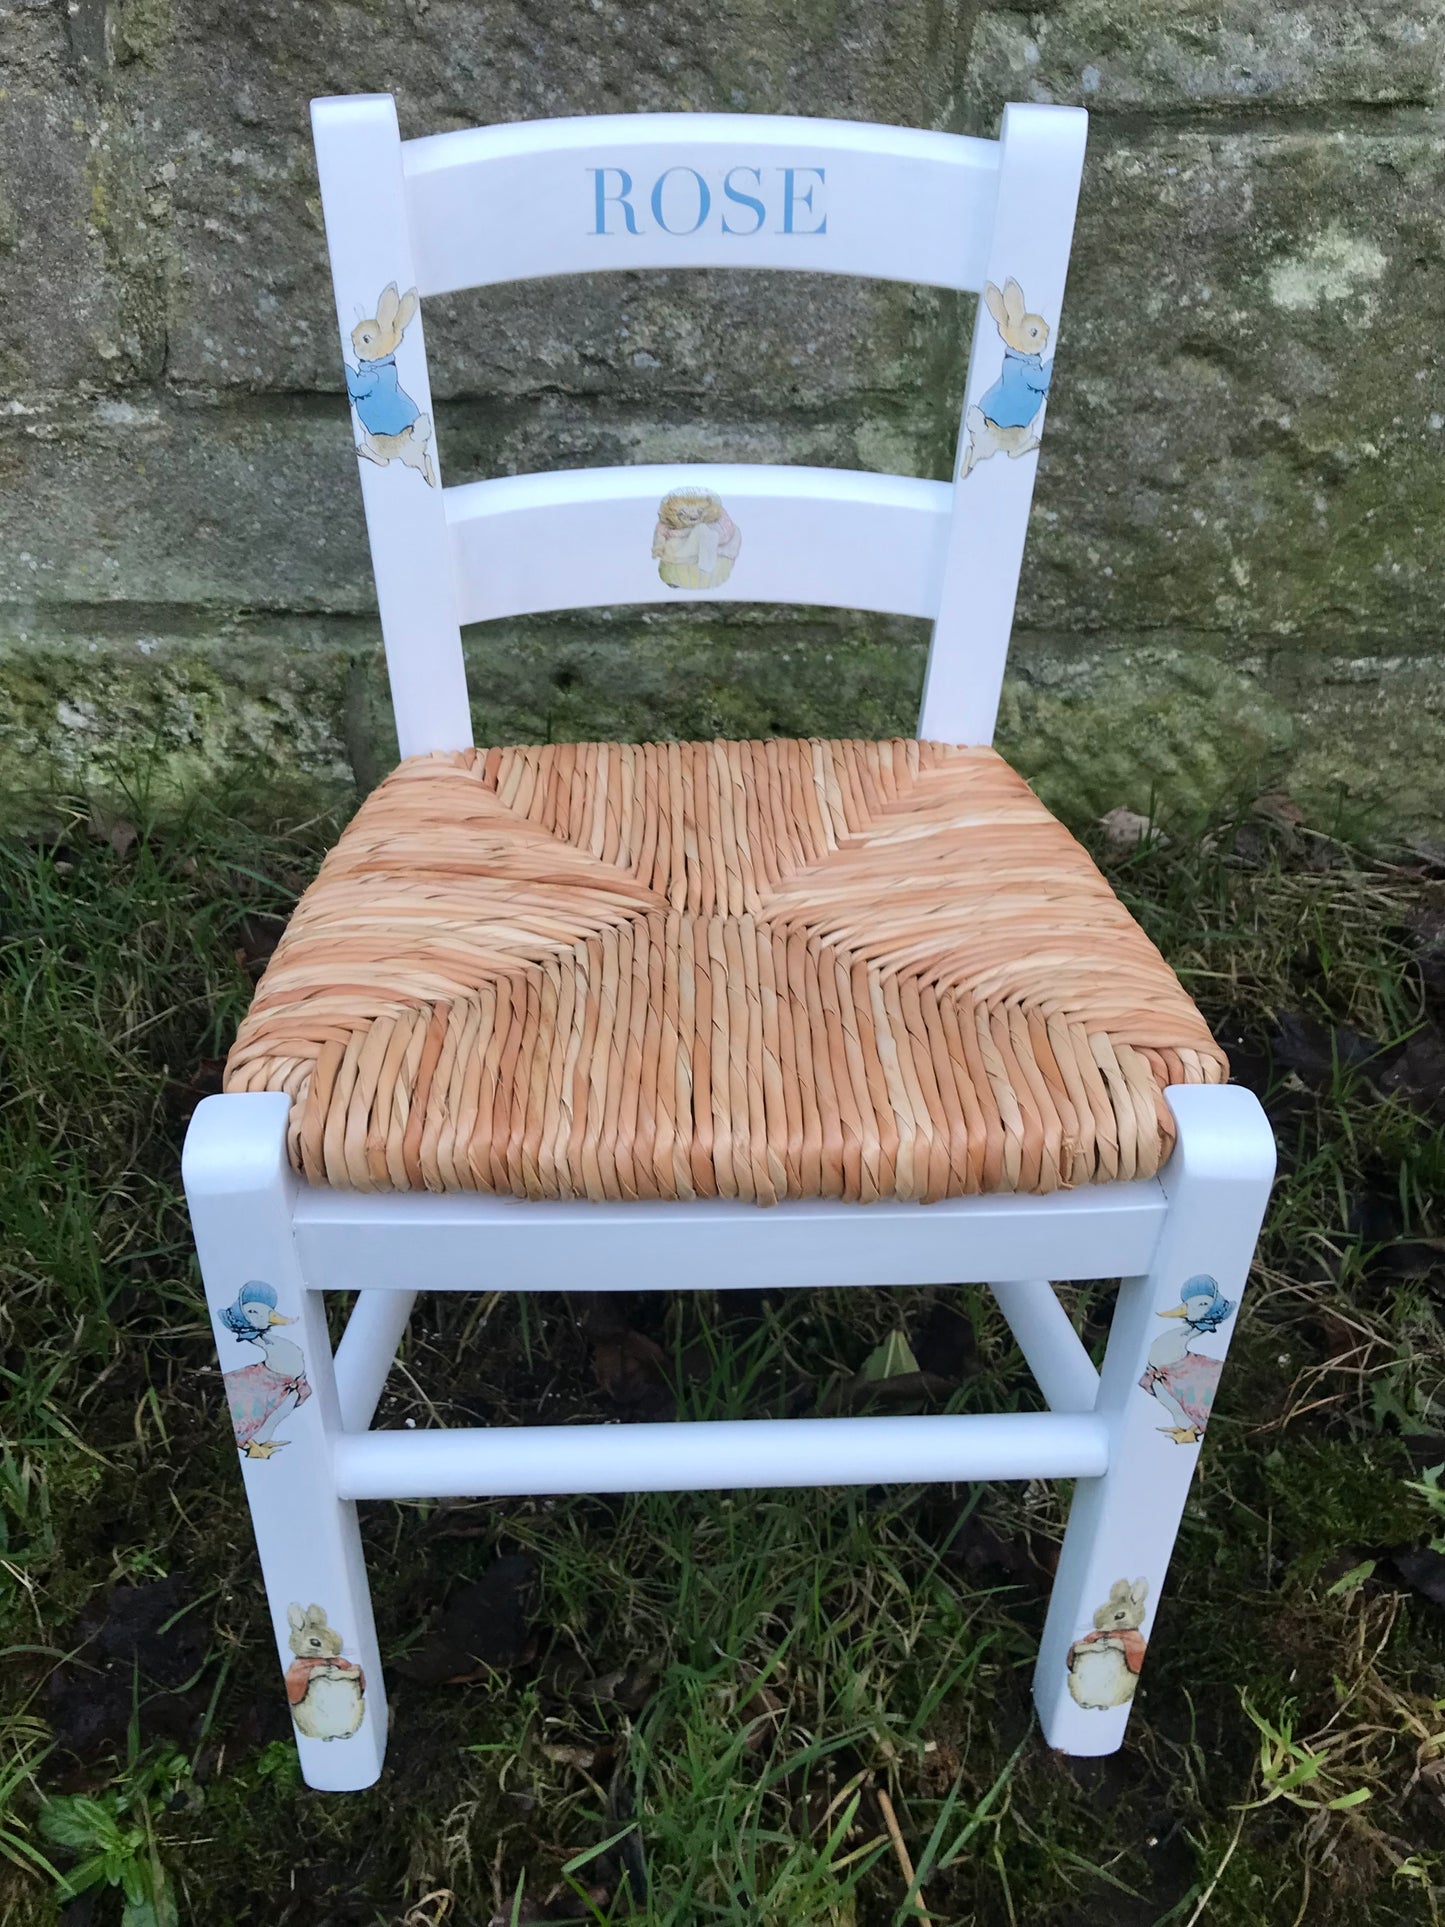 Rush seat personalised children's chair - Beatrix Potter theme - made to order